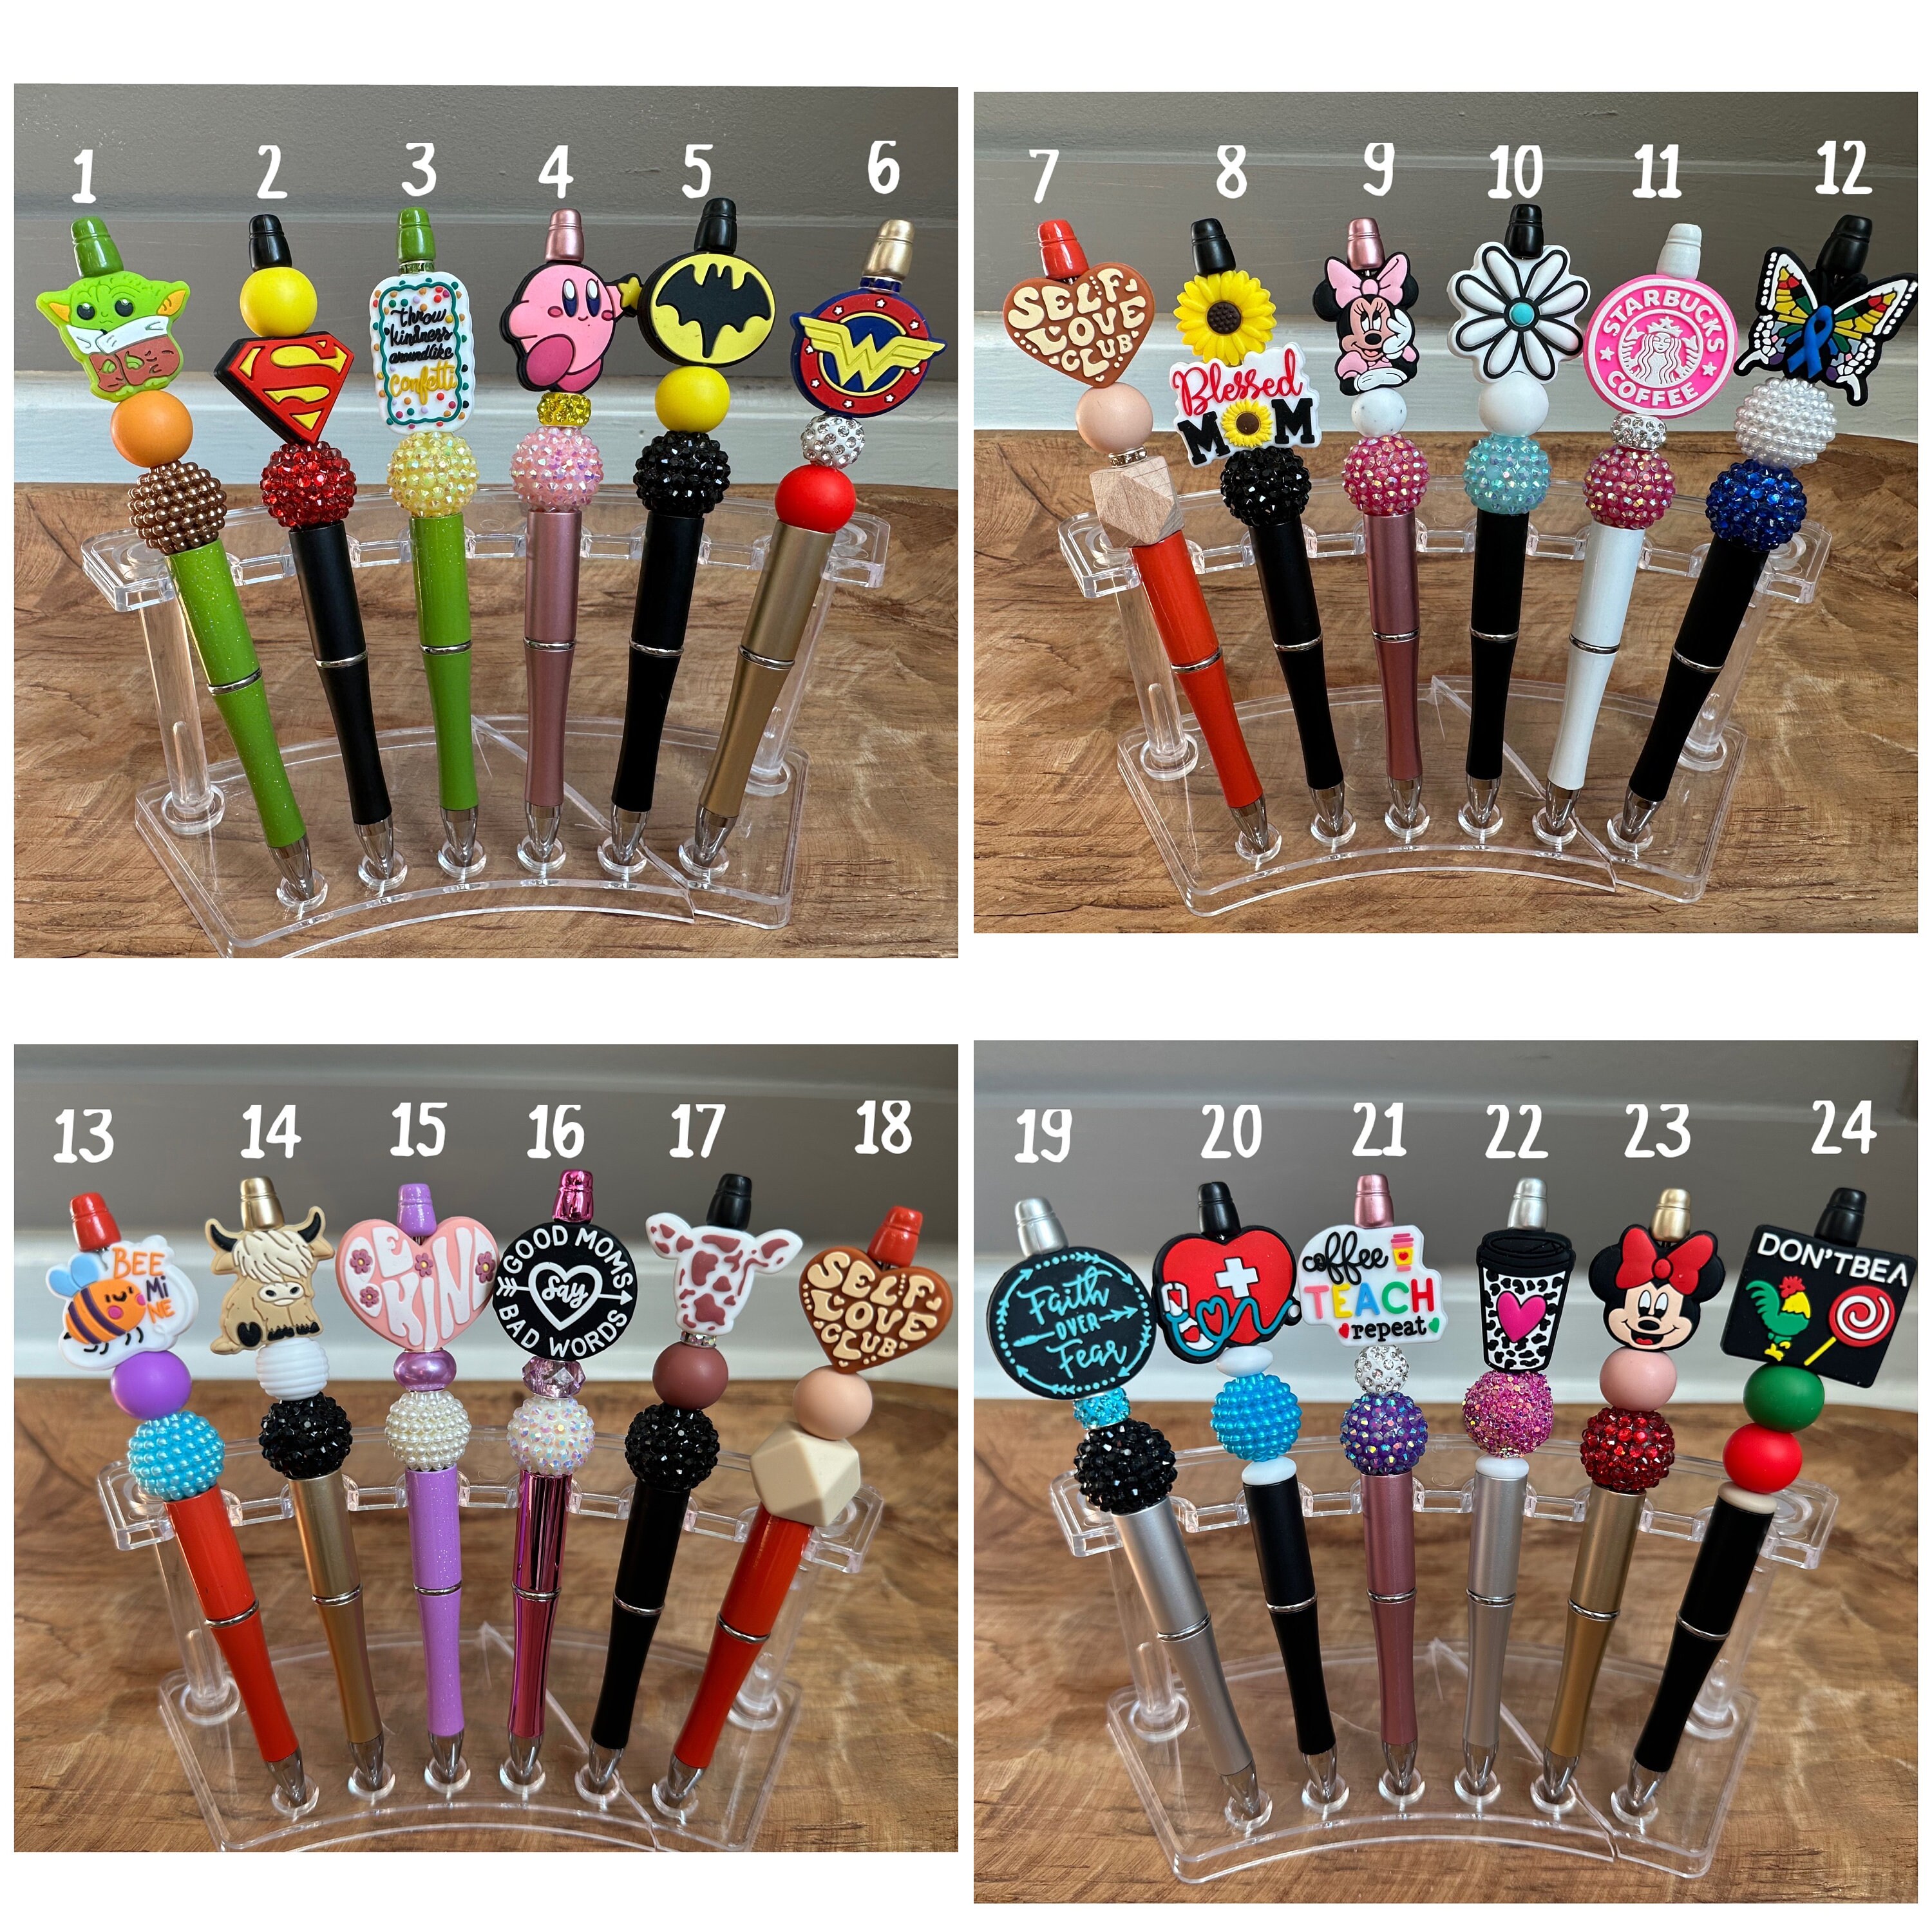 LSFCHYBY 4pcs Sports Car Pens Car Ballpoint Pen Funny Pens for Kids Novelty Pens Cute Pens Cool Kids Pens School Supplies Racing Car Pens Gifts for